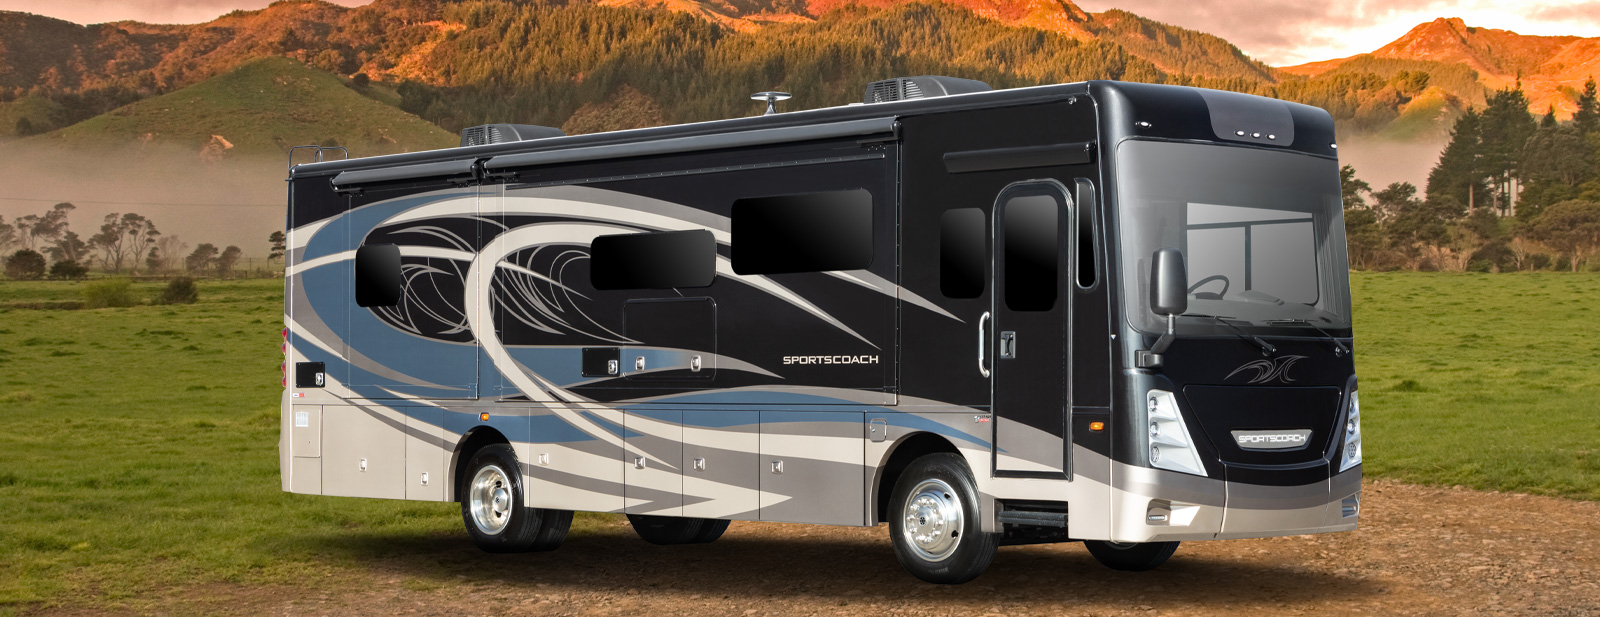 <a href=<img src="rosmanrv.com/images/upload/August_2021/Coachmen-CCC/crosscountrysrs-banner.jpg">alt="A grey 2021 Coachmen Sportscoach SRS, with custom blue and white detailing along the side, parked in front of a mountain"/></a>